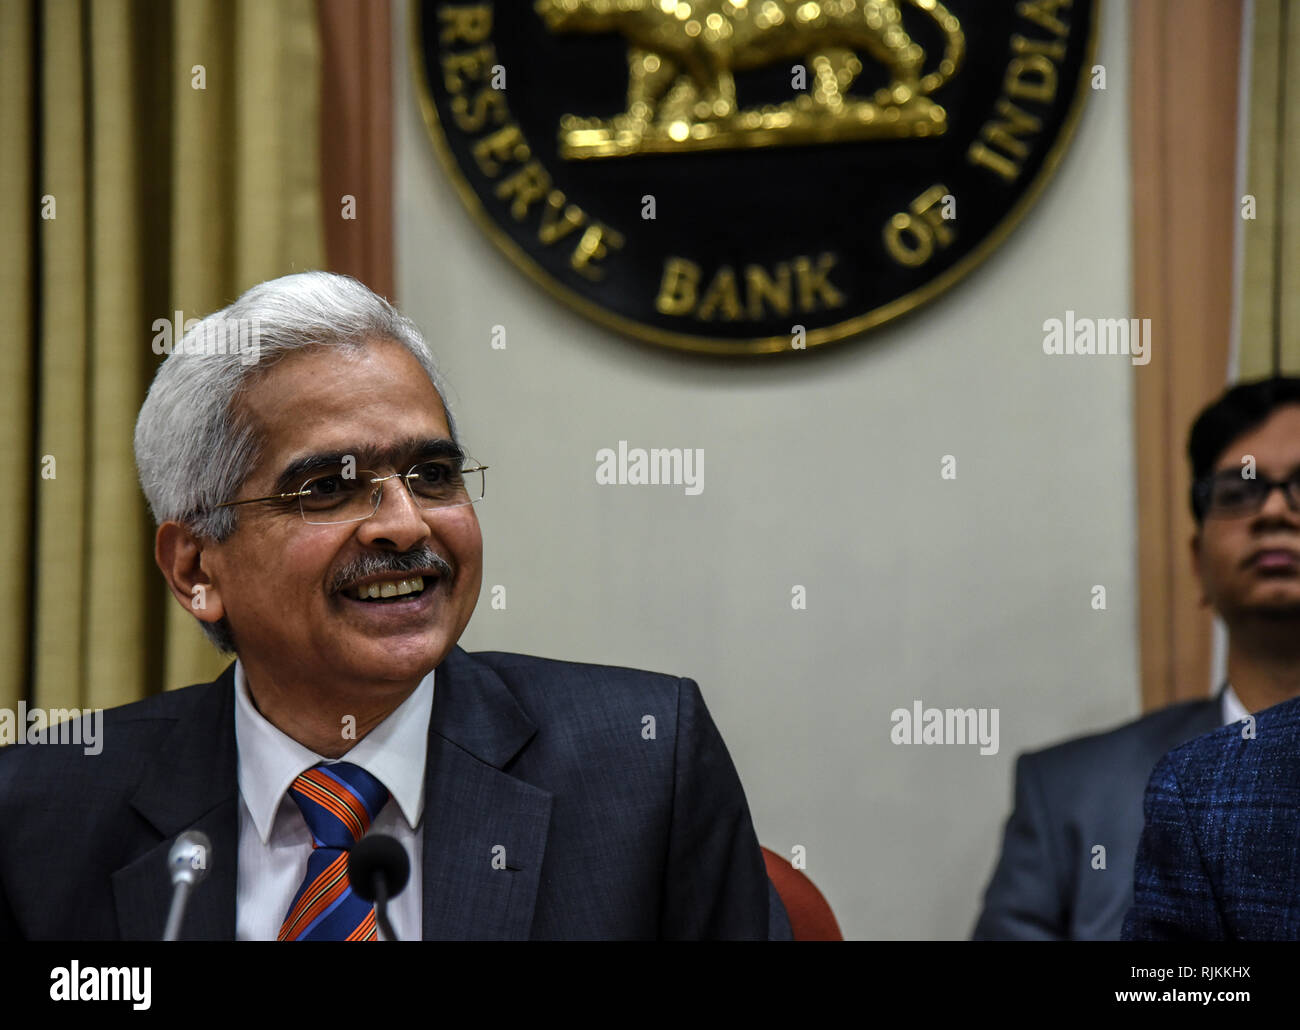 (190207) -- MUMBAI, Feb. 7, 2019 (Xinhua) -- The Reserve Bank of India (RBI) Governor Shaktikanta Das attends a news conference after a monetary policy review in Mumbai, India, Feb. 7, 2019. India's central bank - the Reserve Bank of India (RBI) on Thursday reduced the repo rate, or the interest rate at which it lends money to banks, by a marginal 25 basis points.     The new repo rate now stands at 6.25 percent from the earlier 6.50 percent. (Xinhua/Stringer) Stock Photo